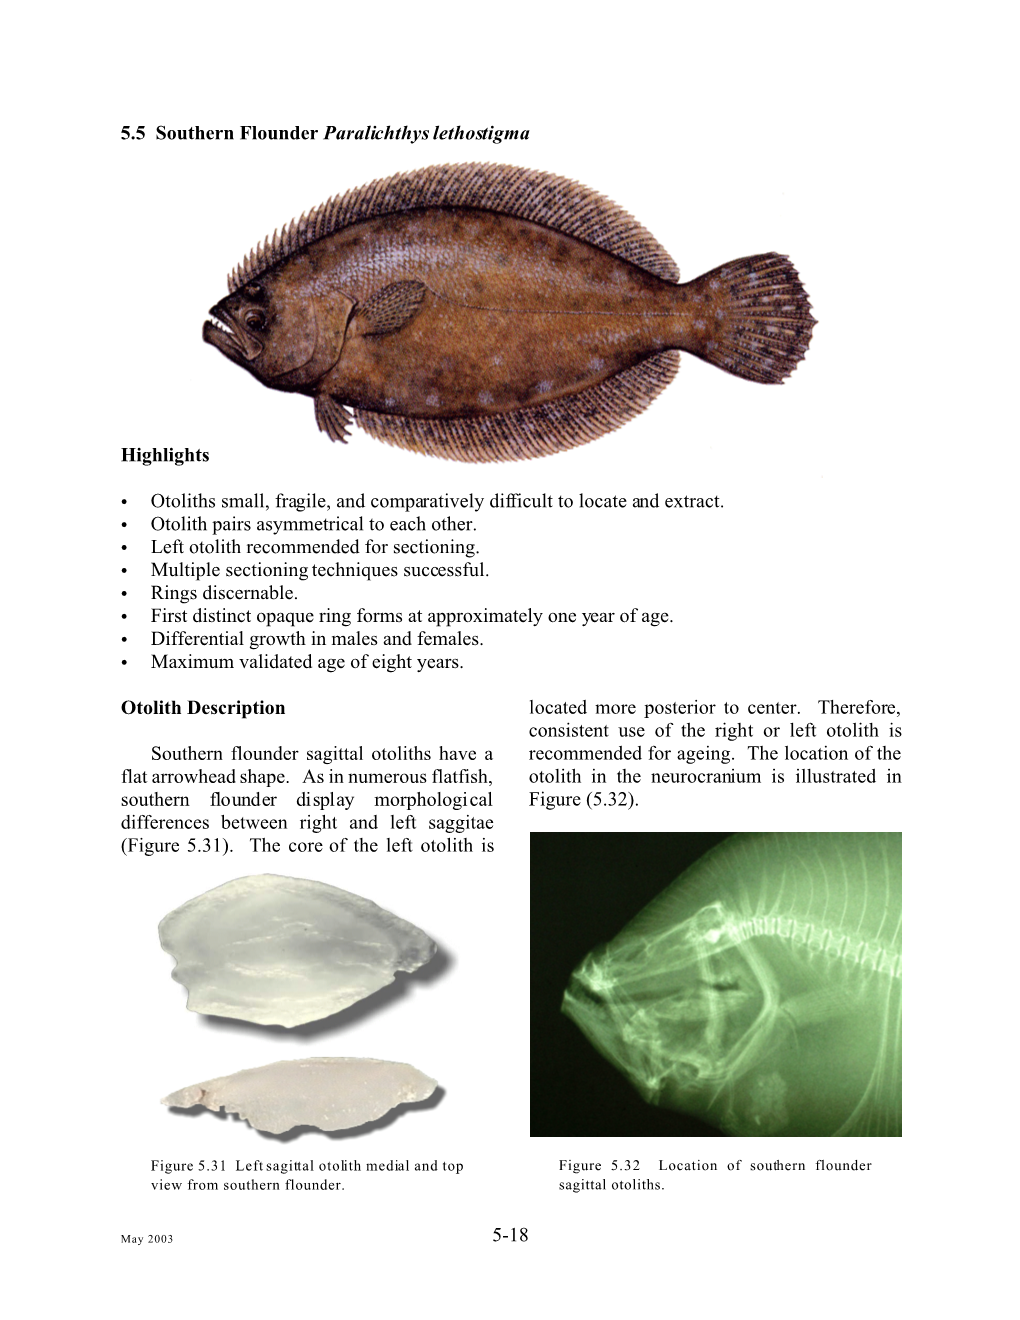 5-18 5.5 Southern Flounder Paralichthys Lethostigma Highlights C Otoliths Small, Fragile, and Comparatively Difficult to Locate